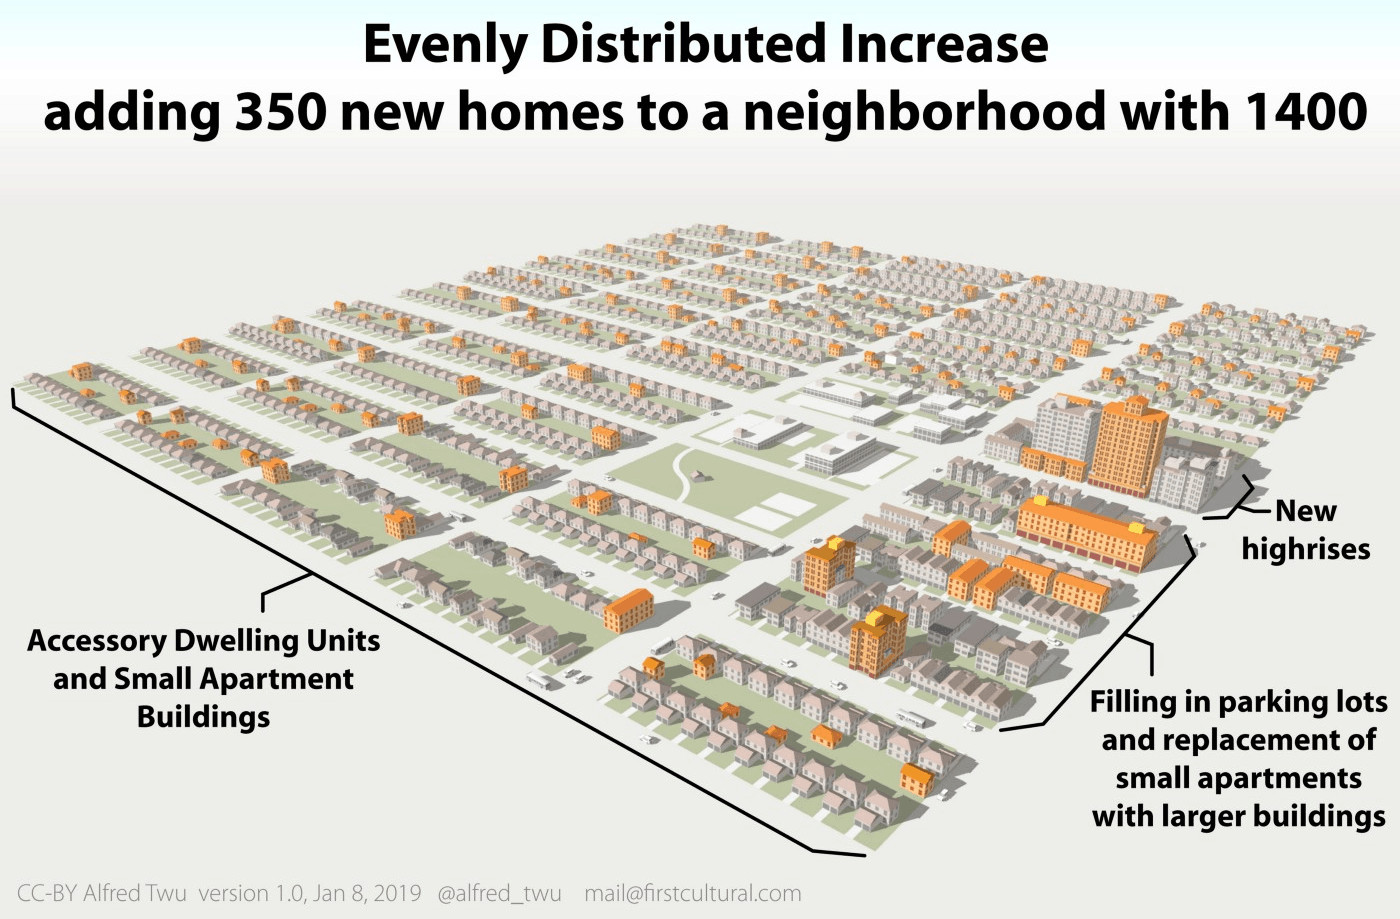 Evenly Distributed Increase of 25 Percent More Density